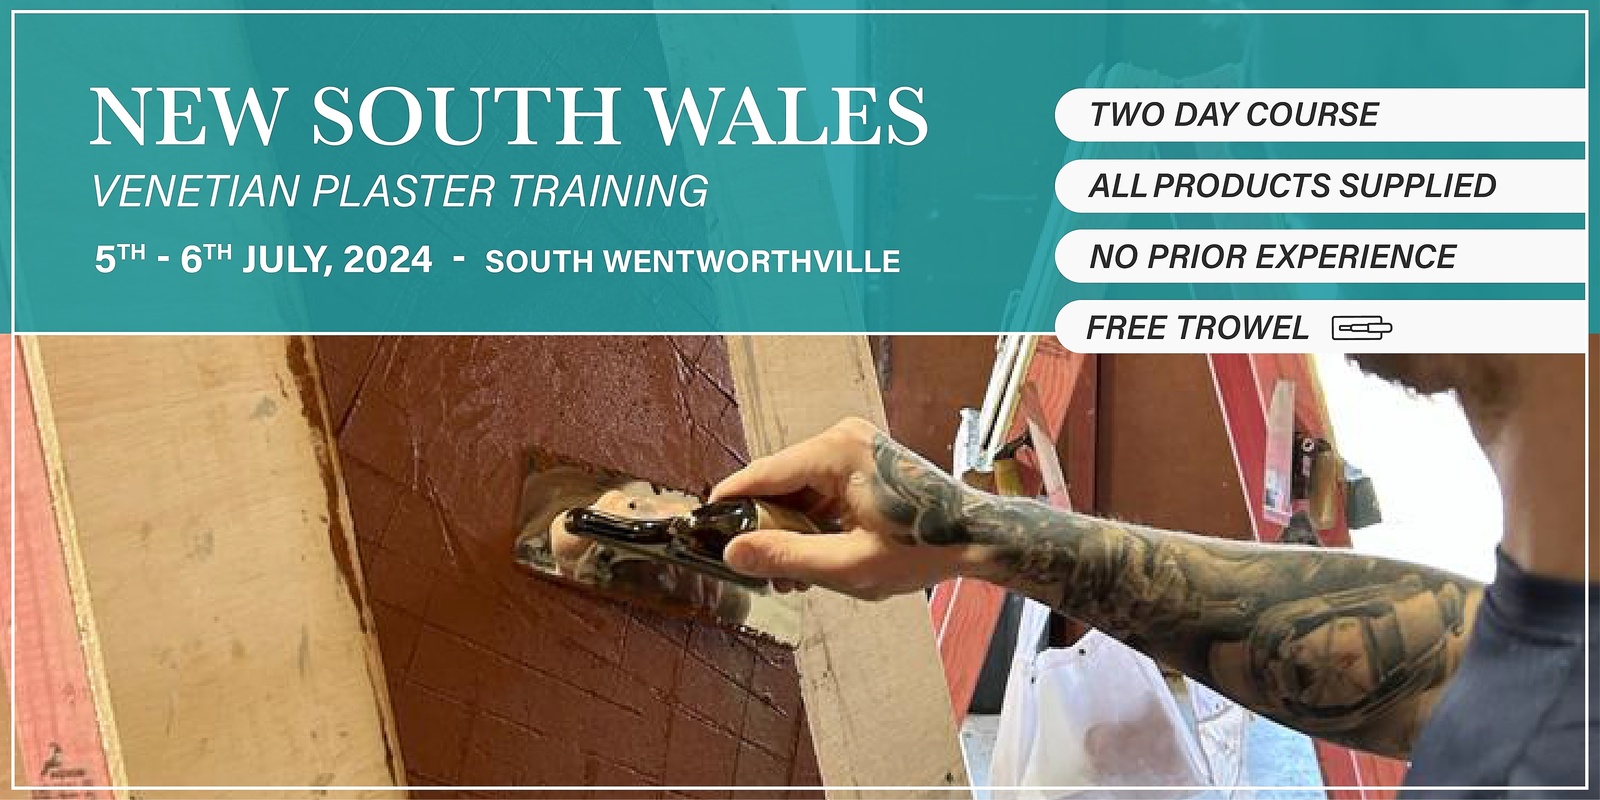 Banner image for NSW Venetian Plaster Training - (5th - 6th July, 2024)